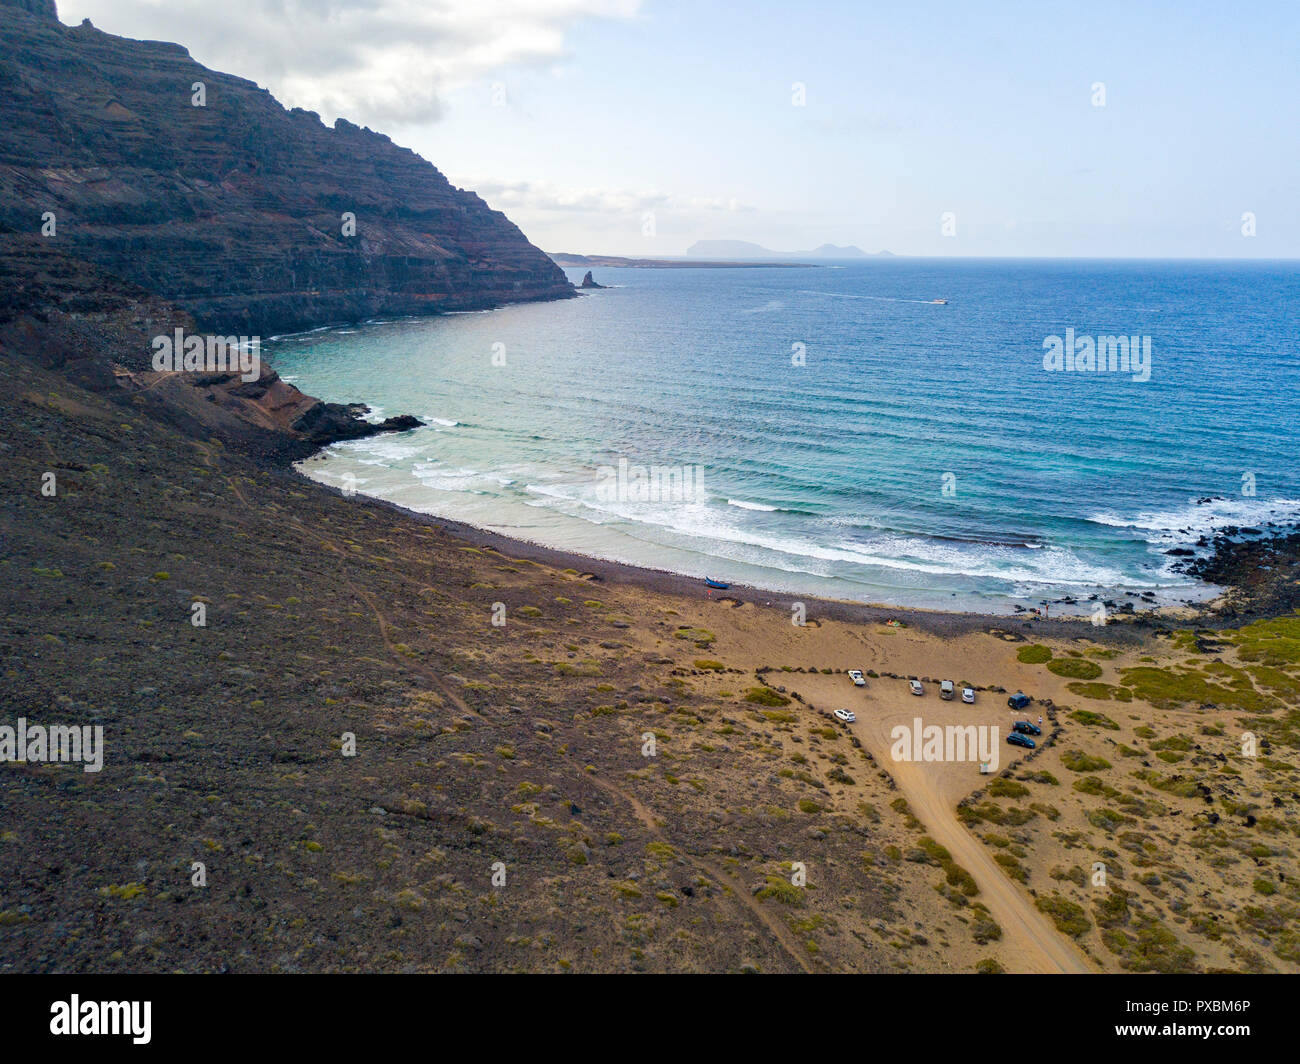 Aerial view of a crystal clear sea with waves and surfers. Playa De La Canteria. Orzola, Lanzarote, Canary Islands. Spain Stock Photo